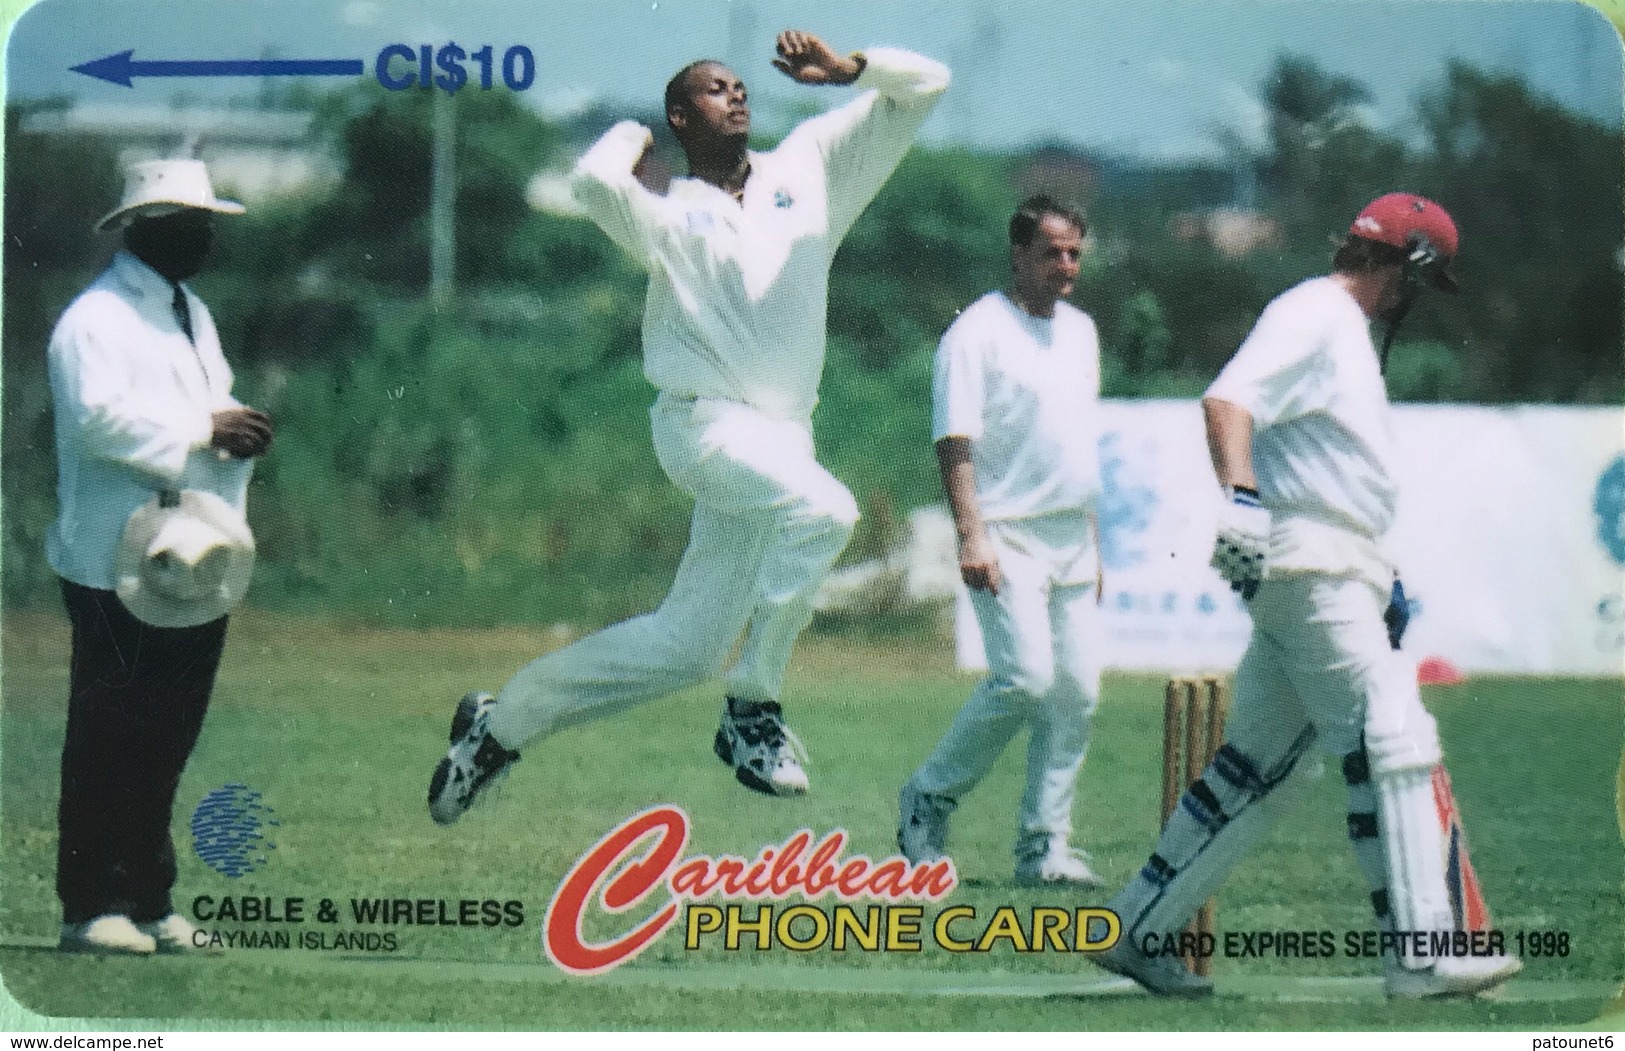 ILES CAYMAN  -  Phonecard  -  Cabble & Wirelees  - West Indies Captain Courtney Walsh  -  CI $ 10 - Iles Cayman